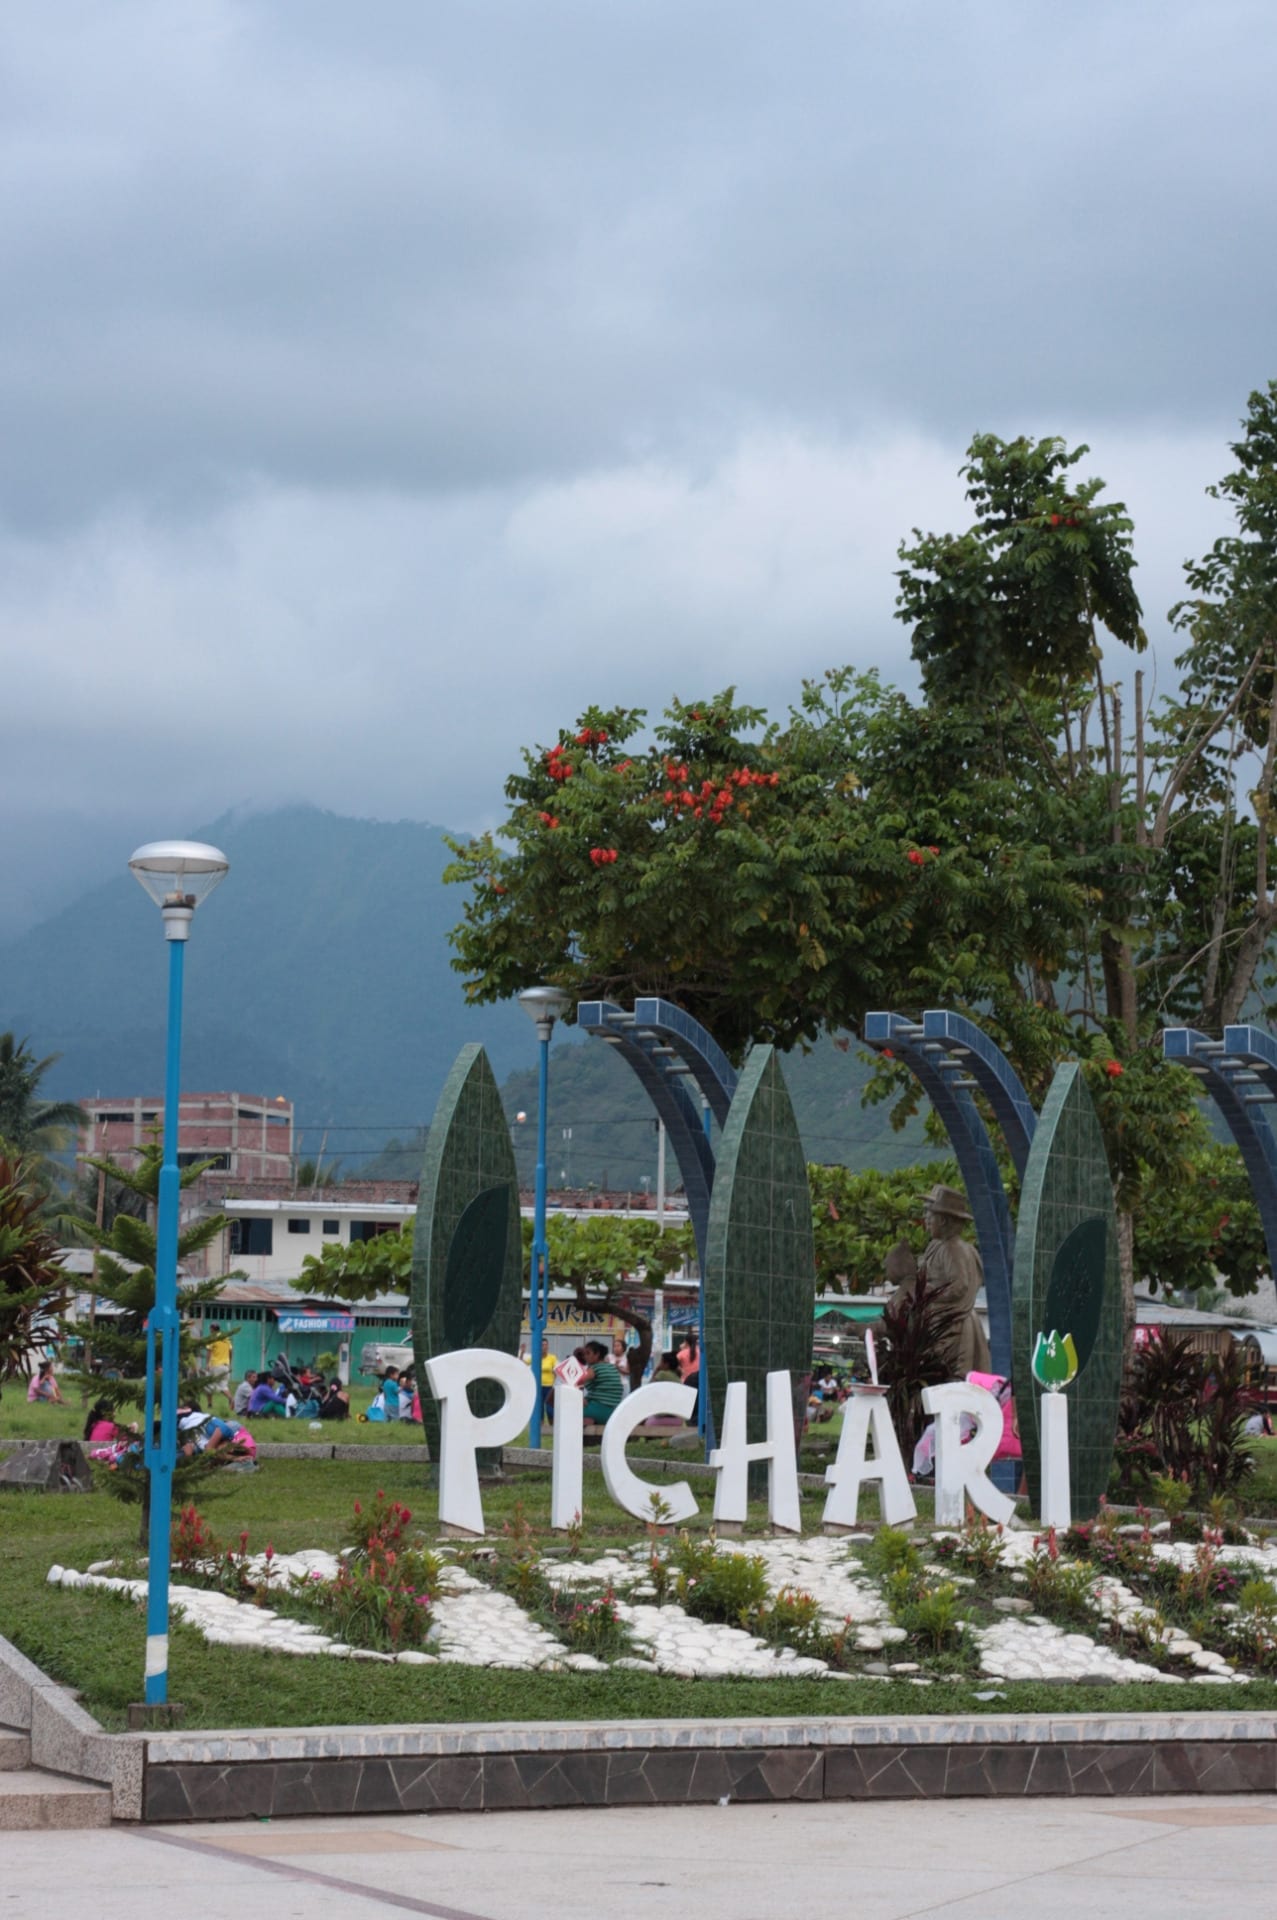 Pichari, a jungle town on the lower part of the slopes of Vilcabamba